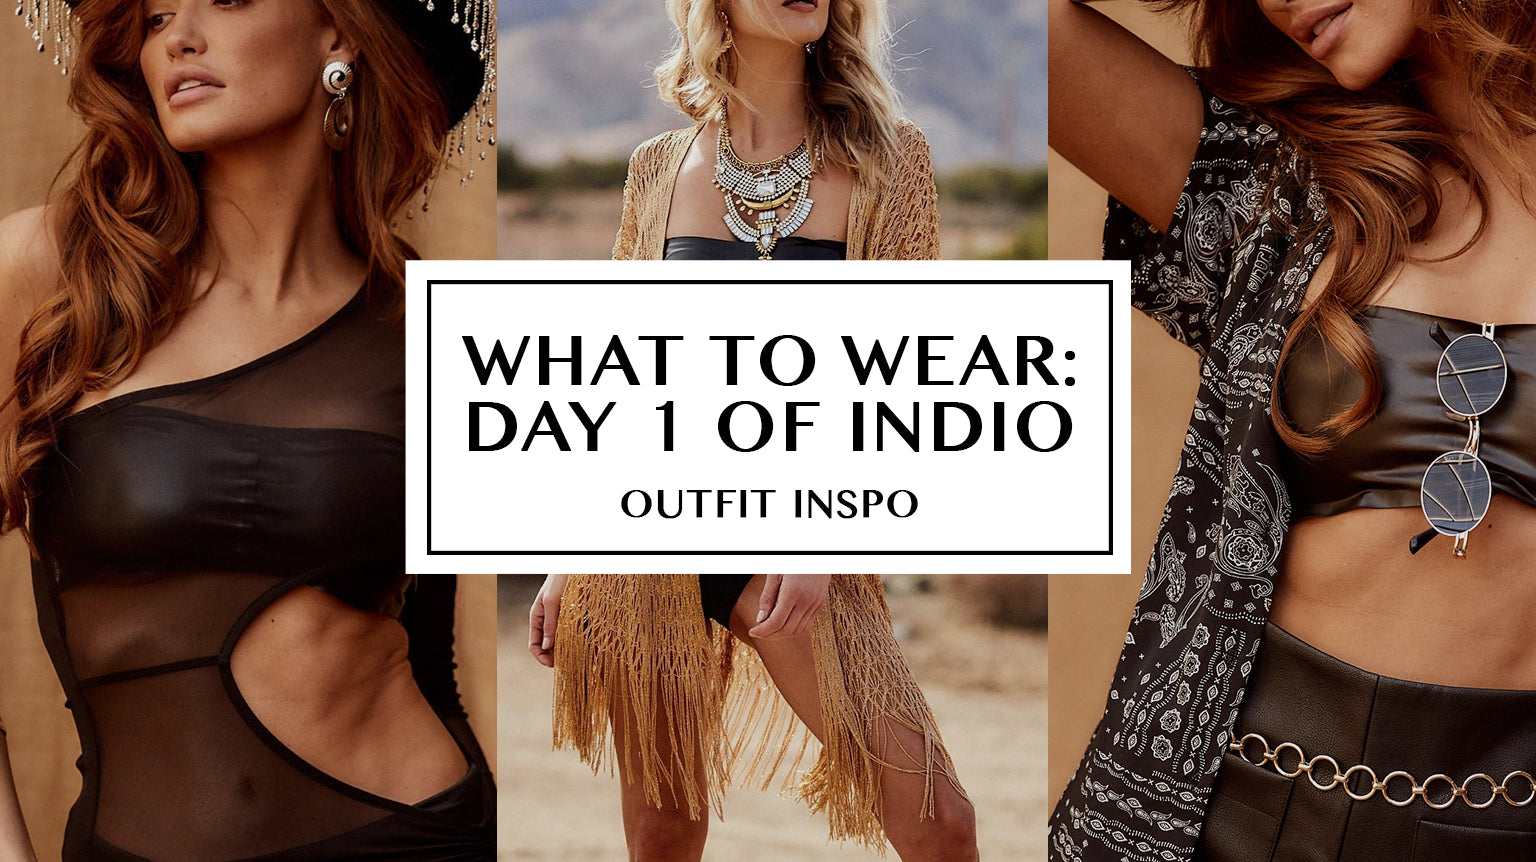 What to Wear for Day 1 of Indio